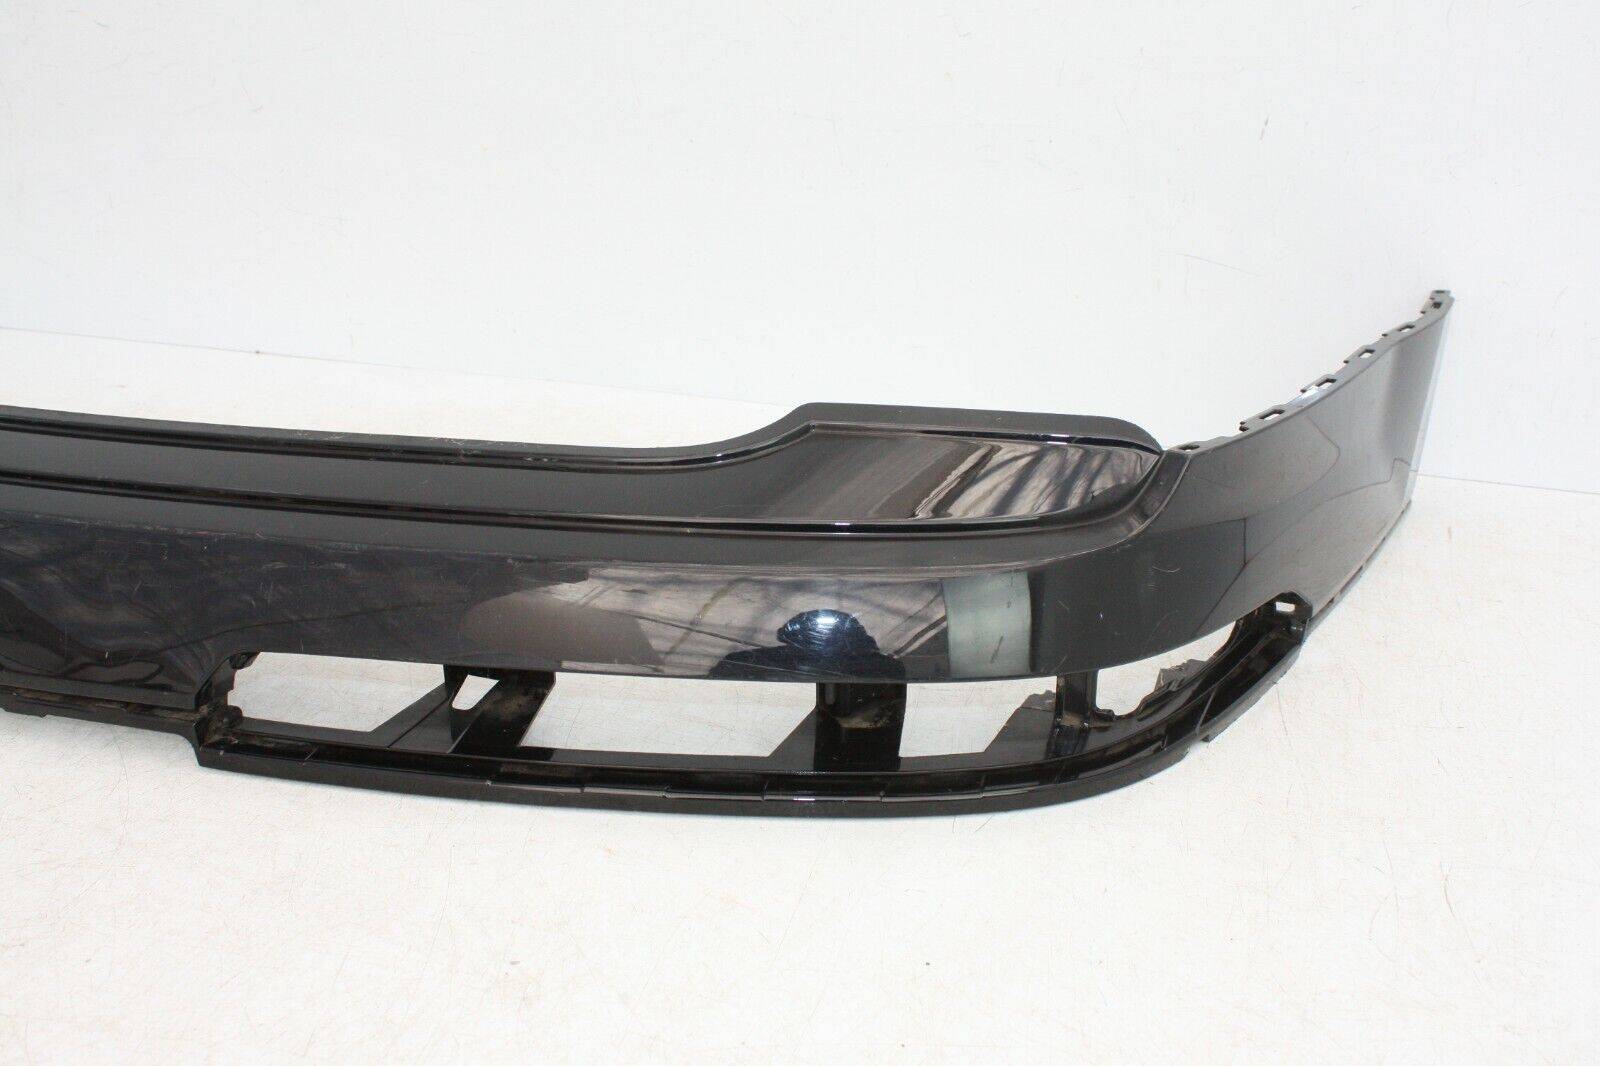 Audi-Q7-S-Line-Rear-Bumper-Upper-Section-2015-TO-2019-4M0807511-175902924573-4